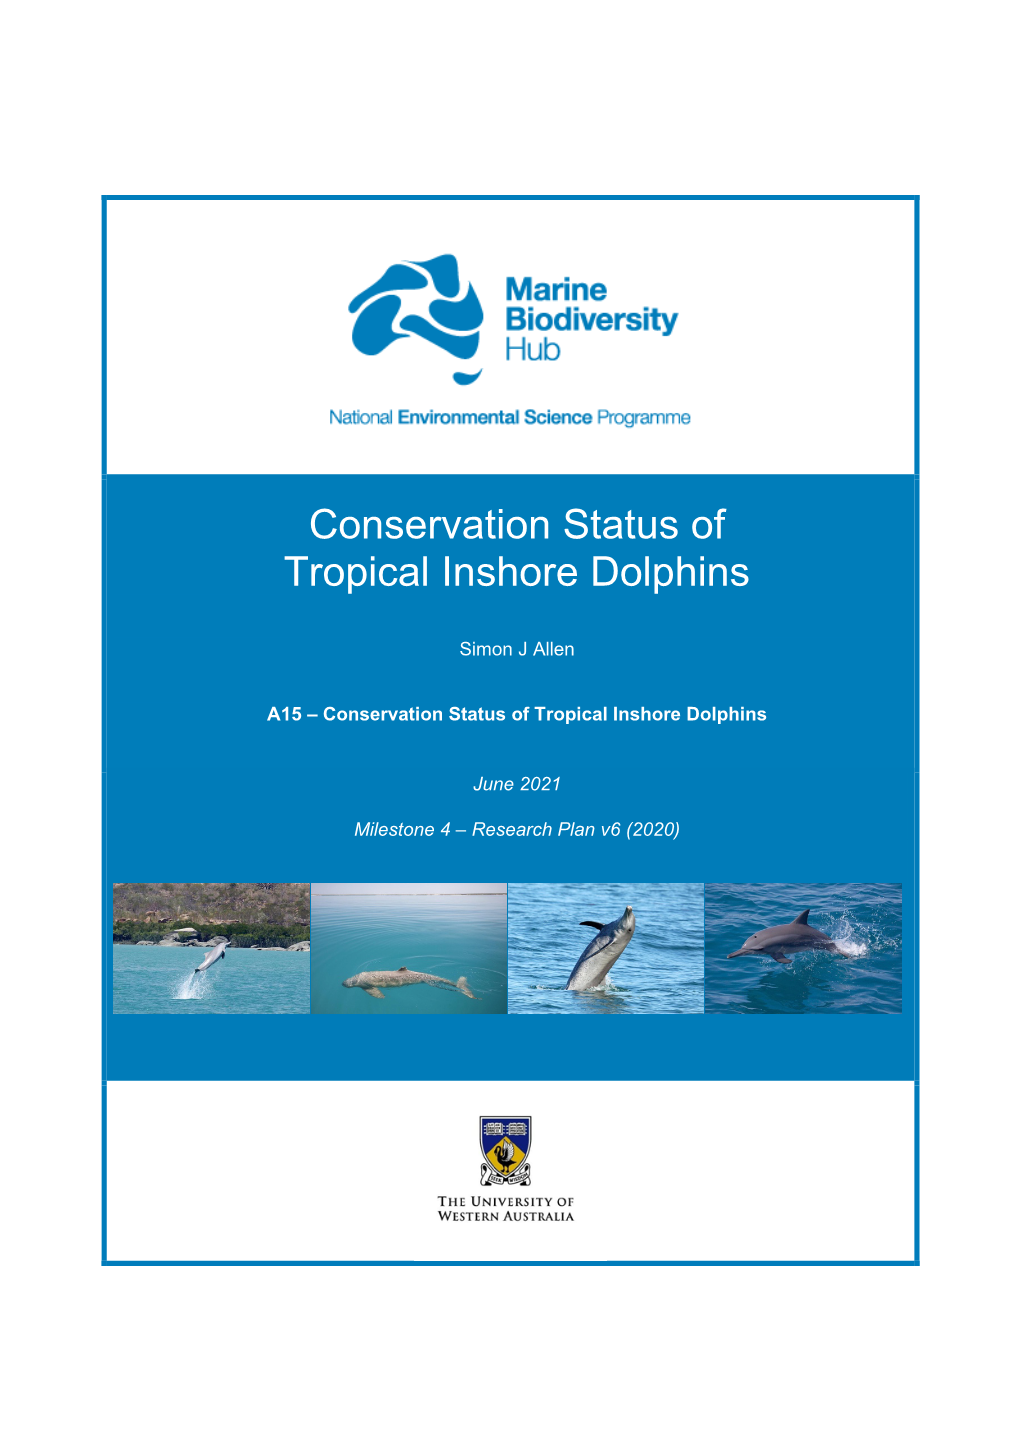 Conservation Status of Tropical Inshore Dolphins